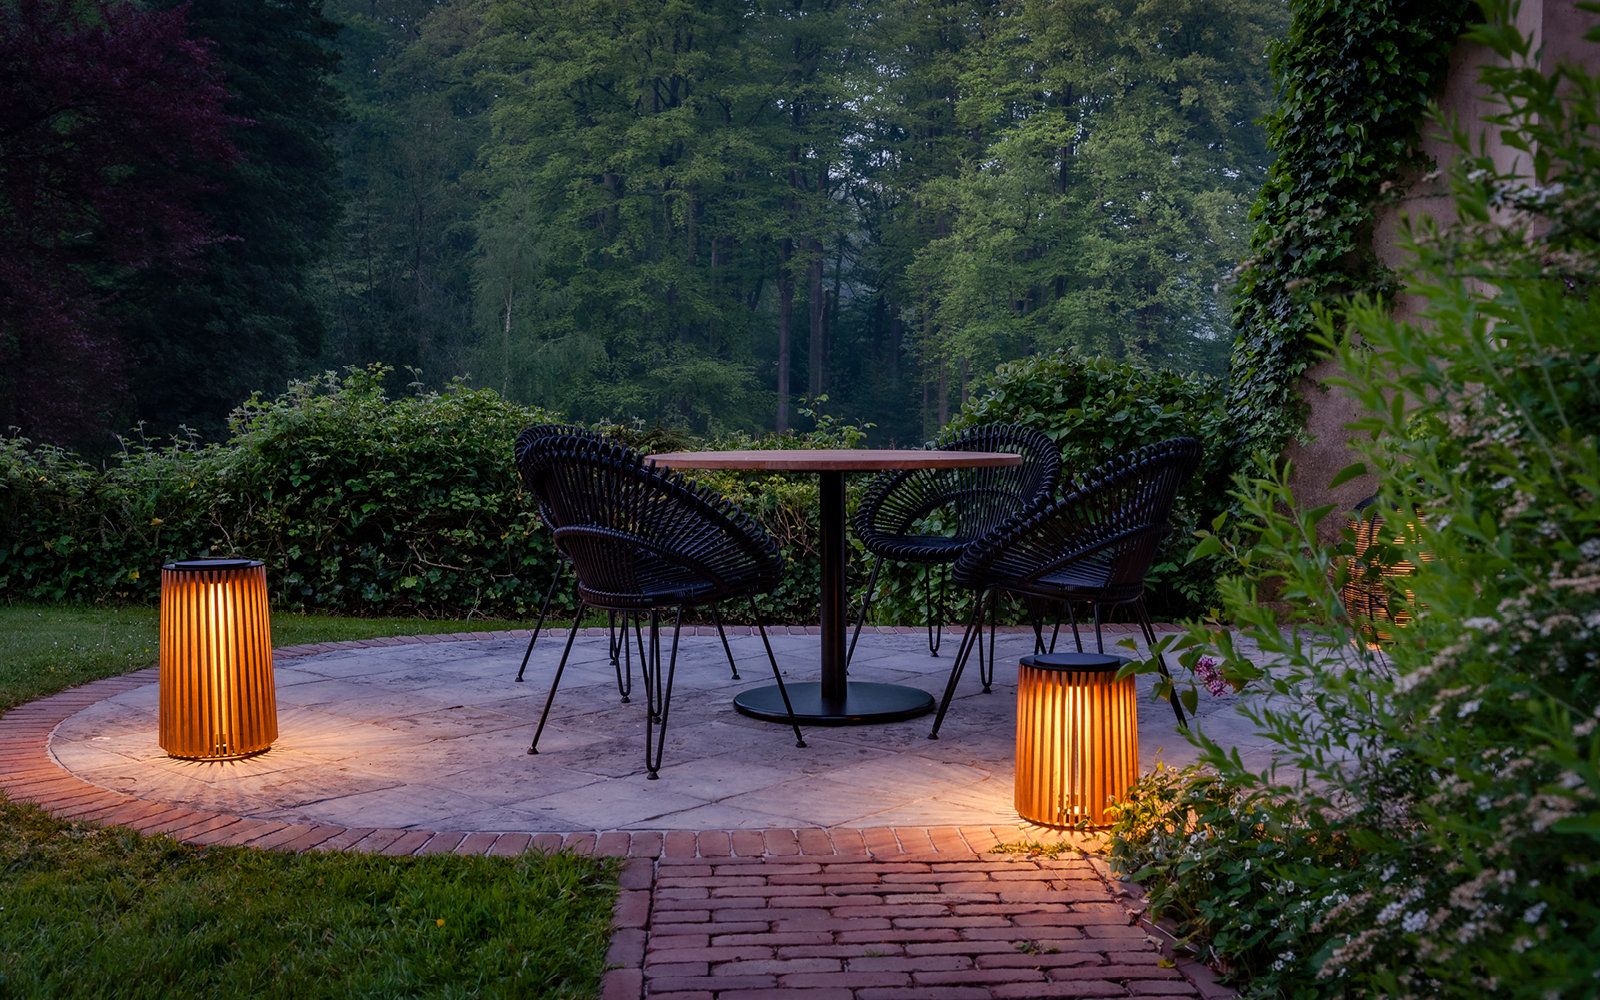 Roxy dining chair with ronda bistro table and maya lanterns